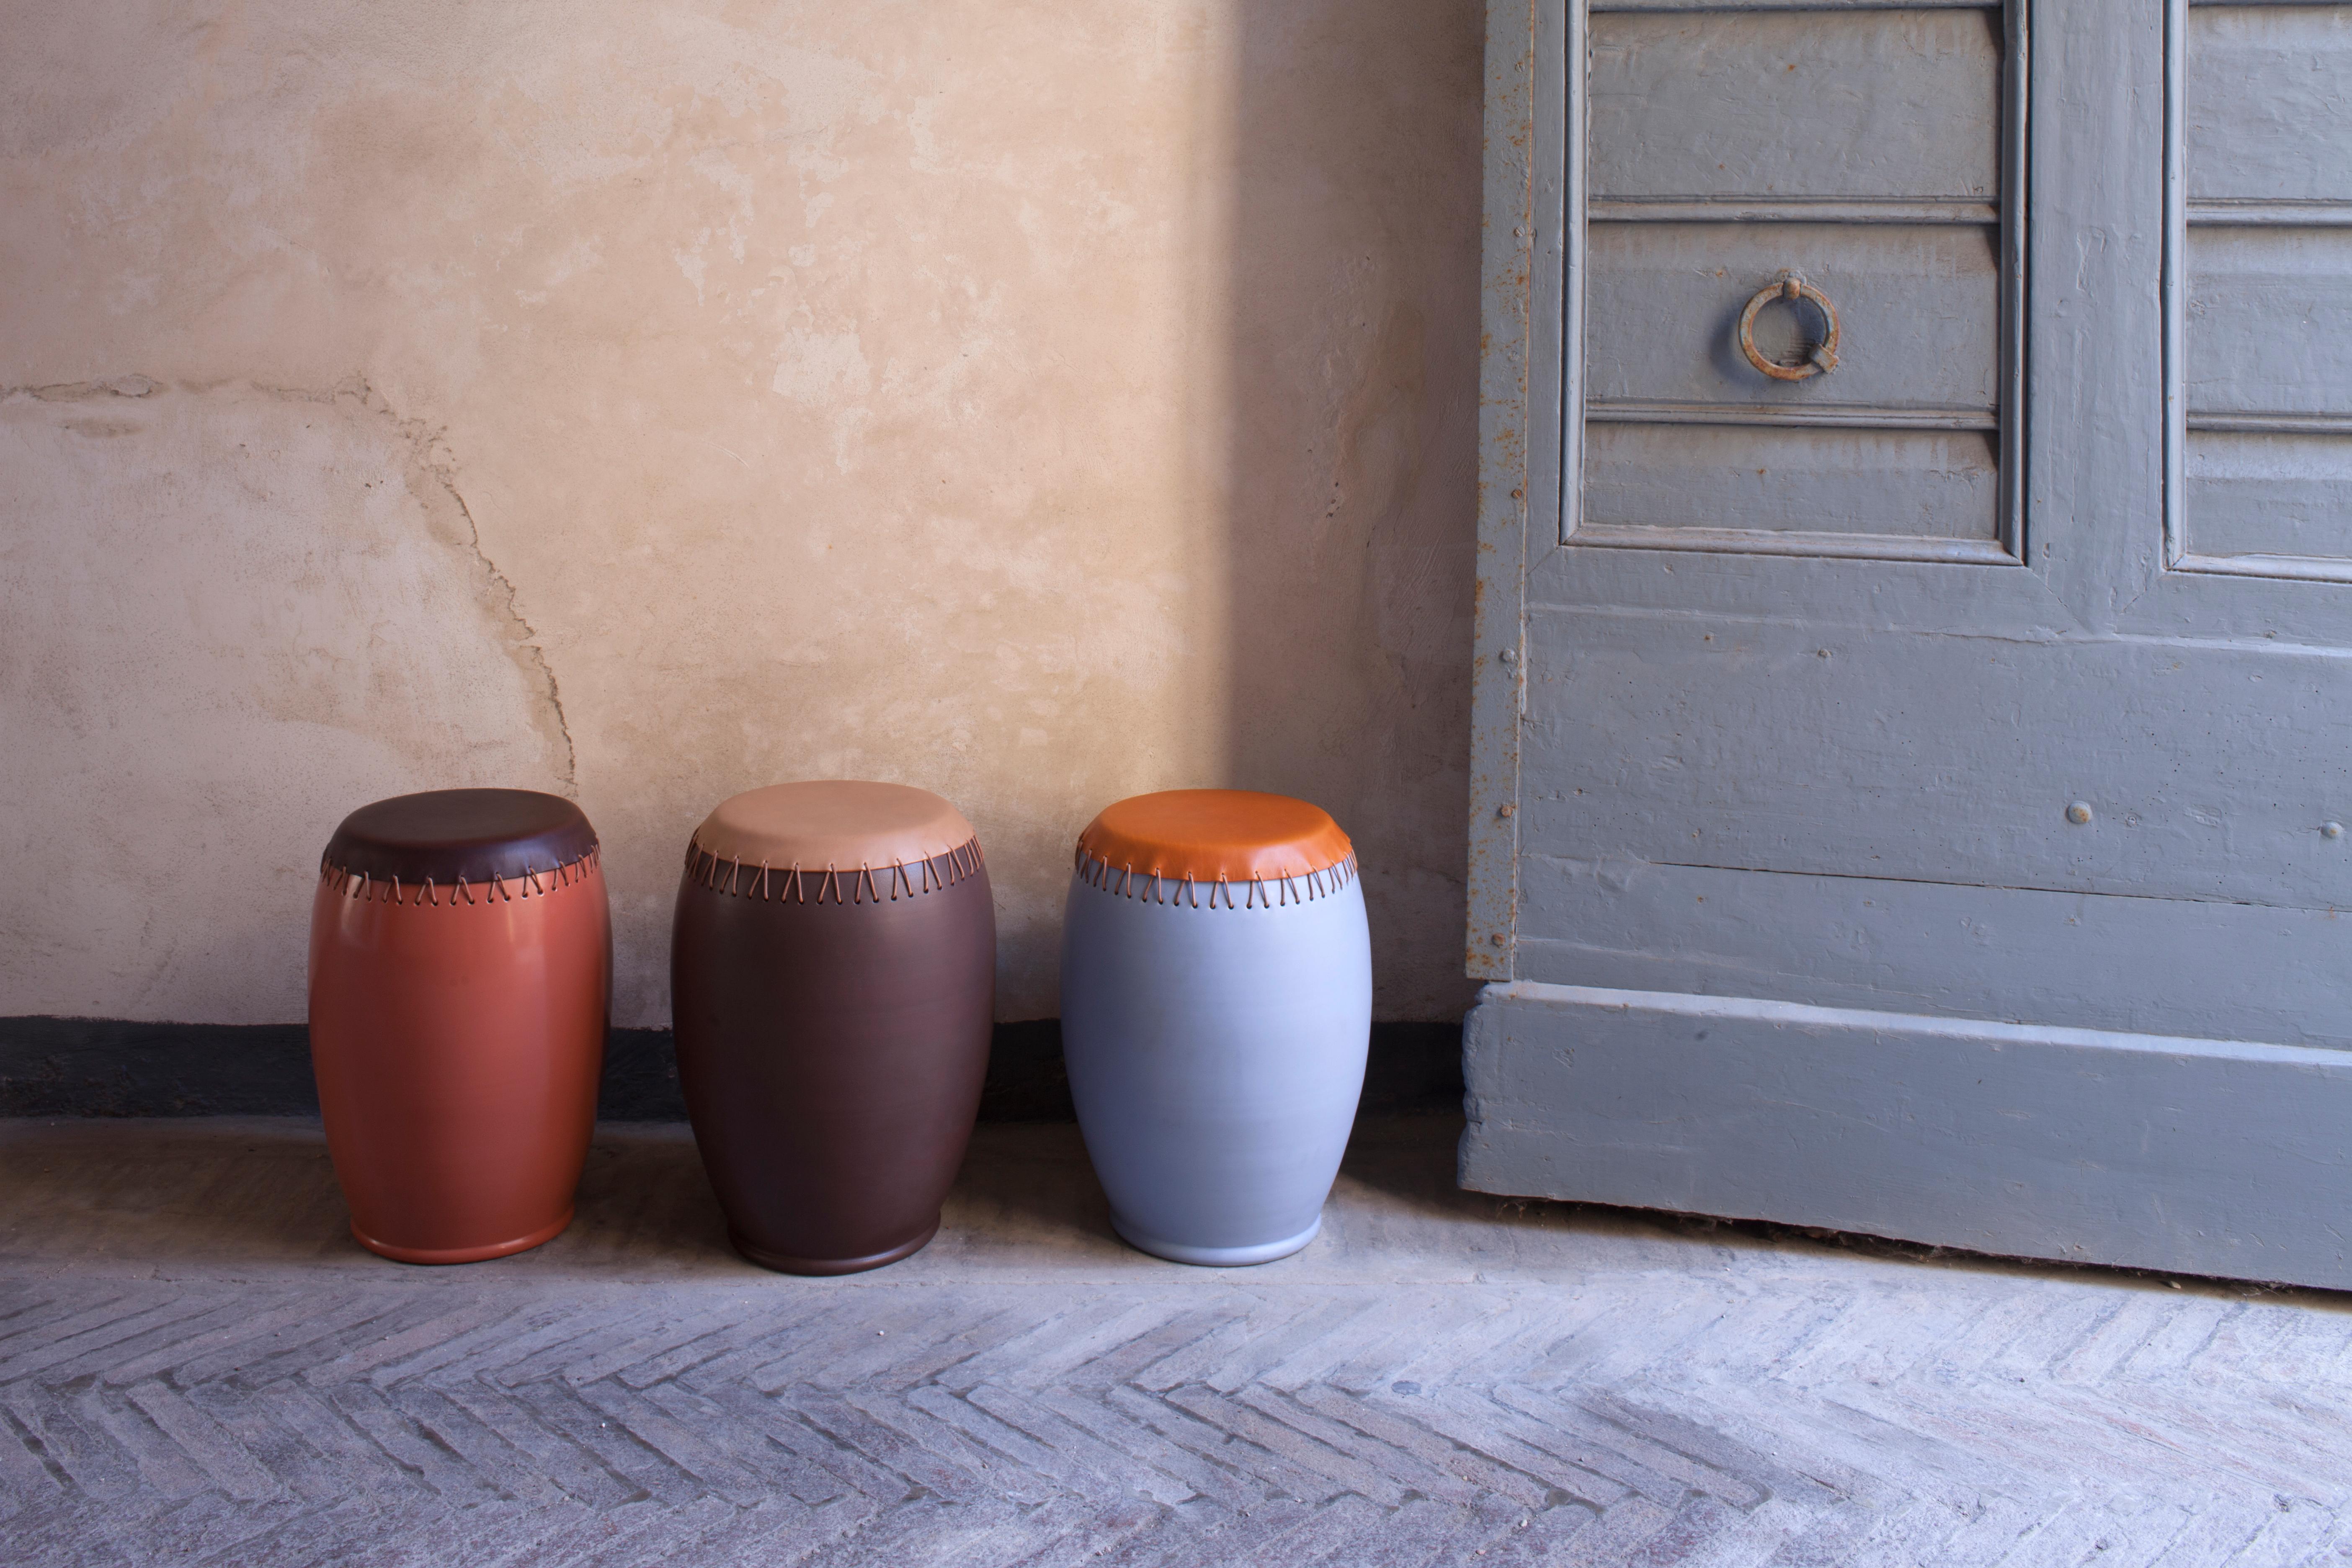 Bombo leather side tables by Nestor Perkal
It can also be used as a stool
Dimensions: 55 x 40 x 40 cm
Enamelled stoneware in three different colors, genuine Italian vegetable-tanned leather, colours as per available range, lace in natural